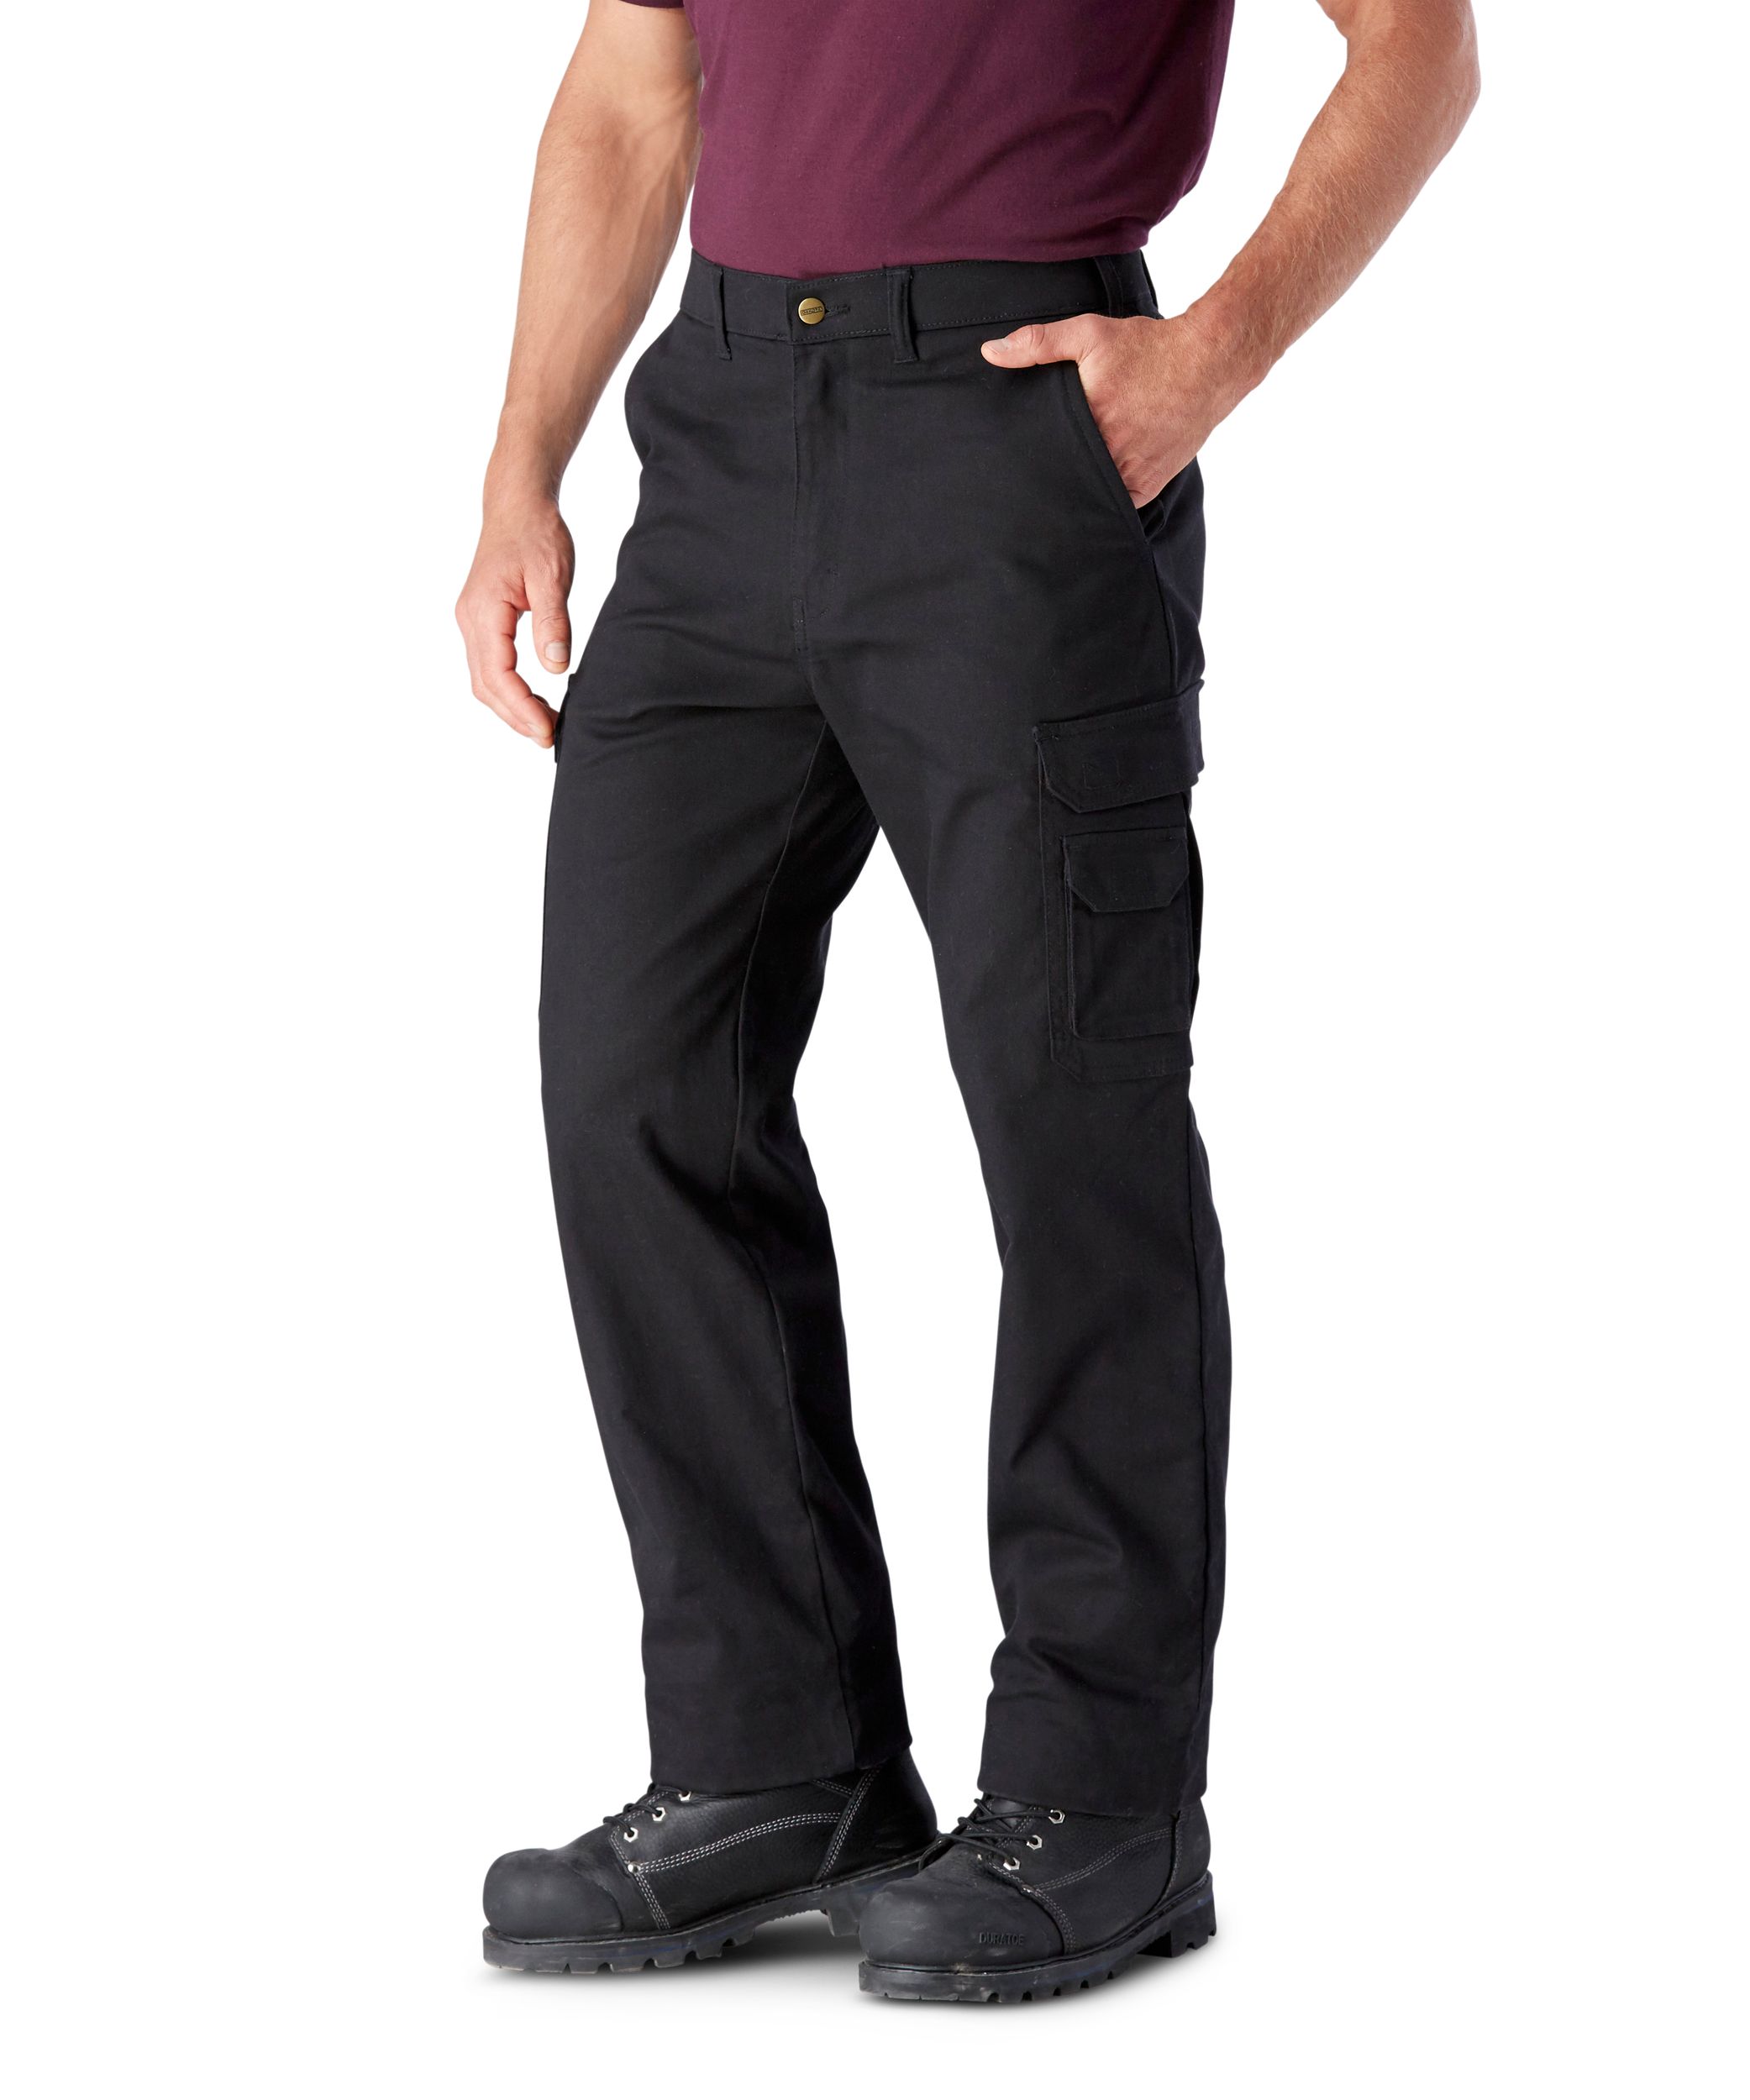 Men Stretch Cargo Pants with Sherpa Fleece Lined Multi Pockets Straight Leg  Work Outdoors Hiking Trousers - Walmart.com